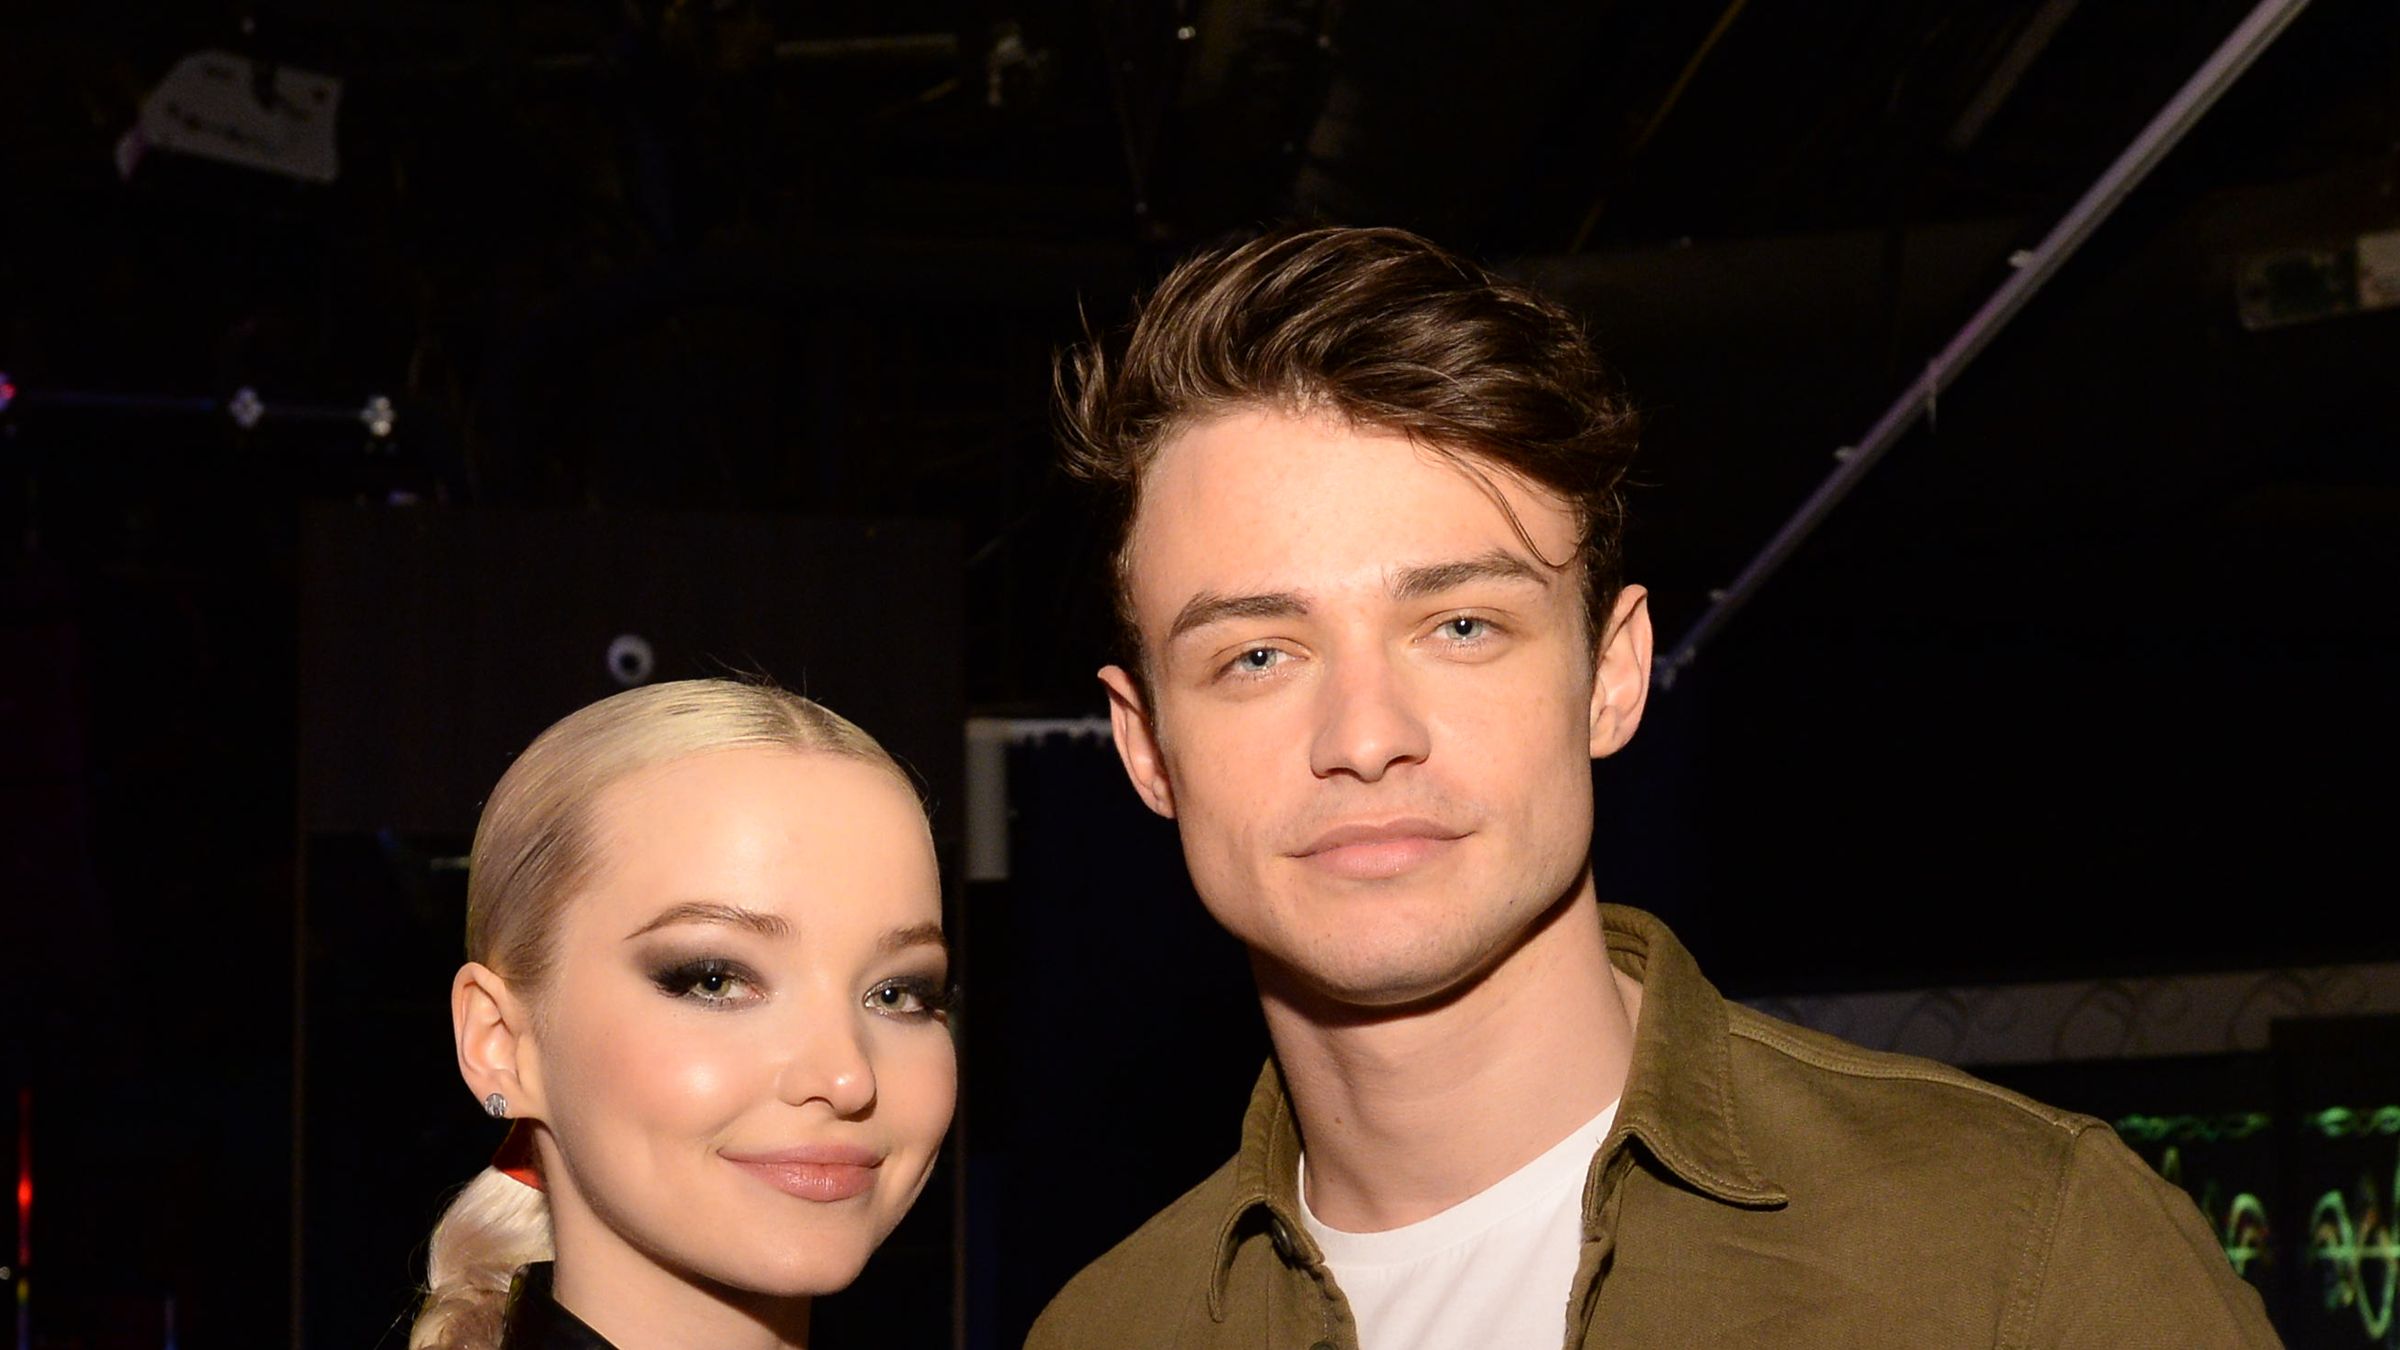 Dove Cameron Lesbian Sex - Dove Cameron and Thomas Doherty Split After Almost Four Years Together